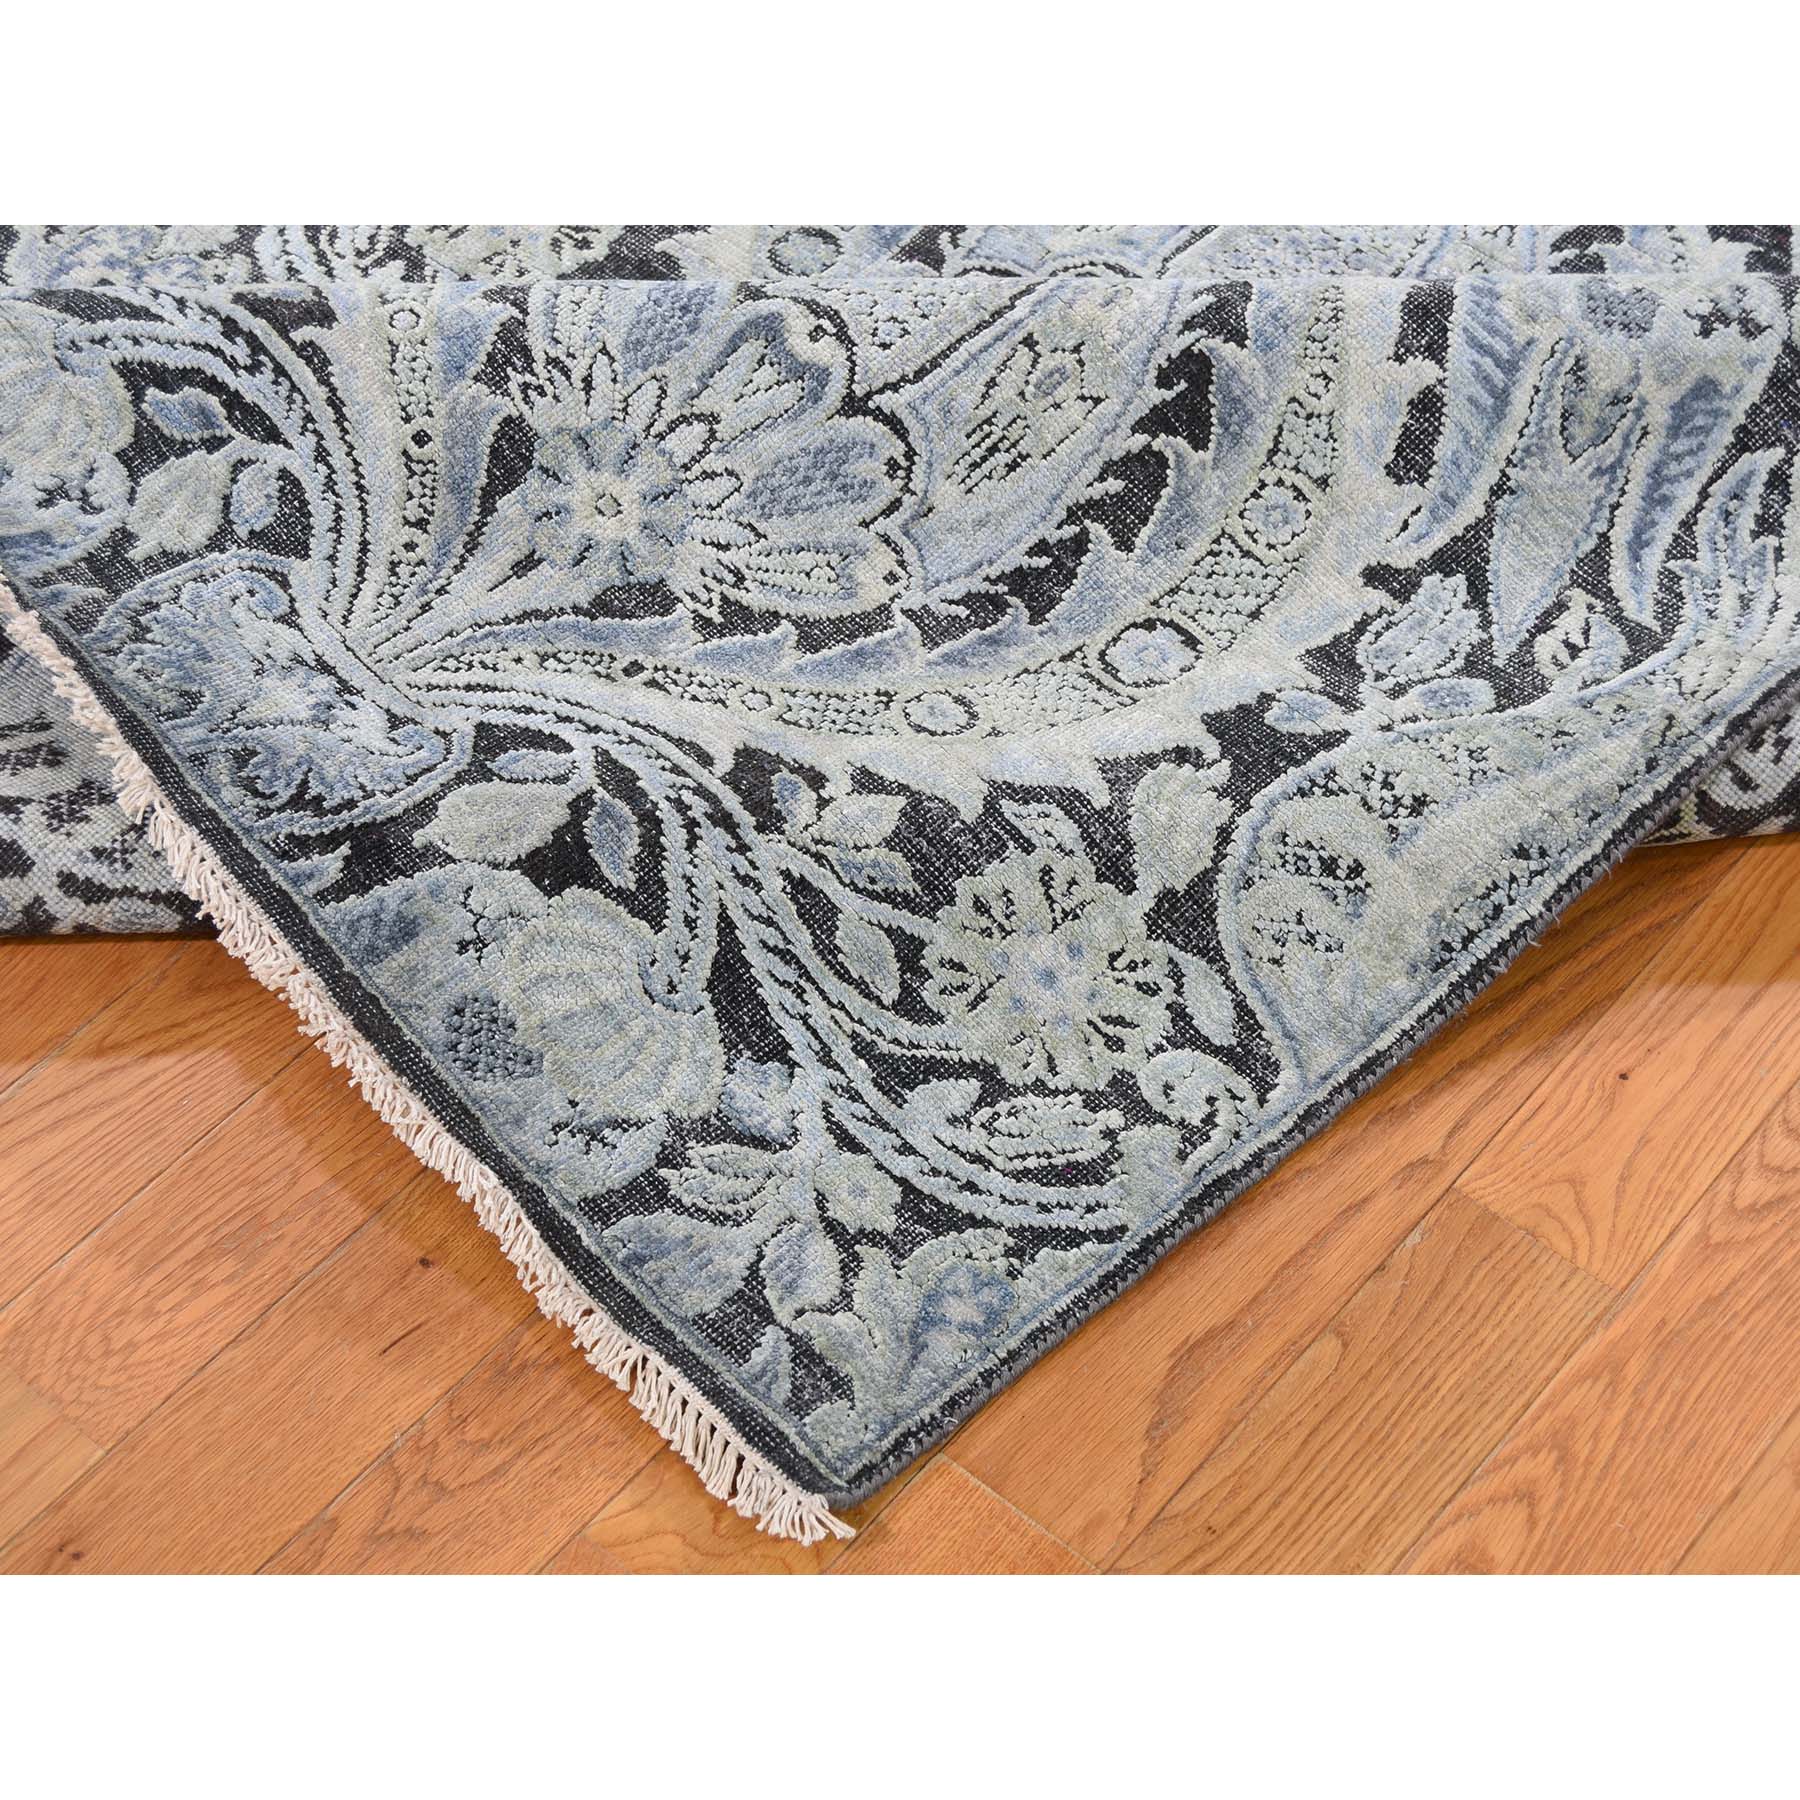 9-x12-2  Pure Silk With Textured Wool Lotus Flower Design Hand-Knotted Rug 